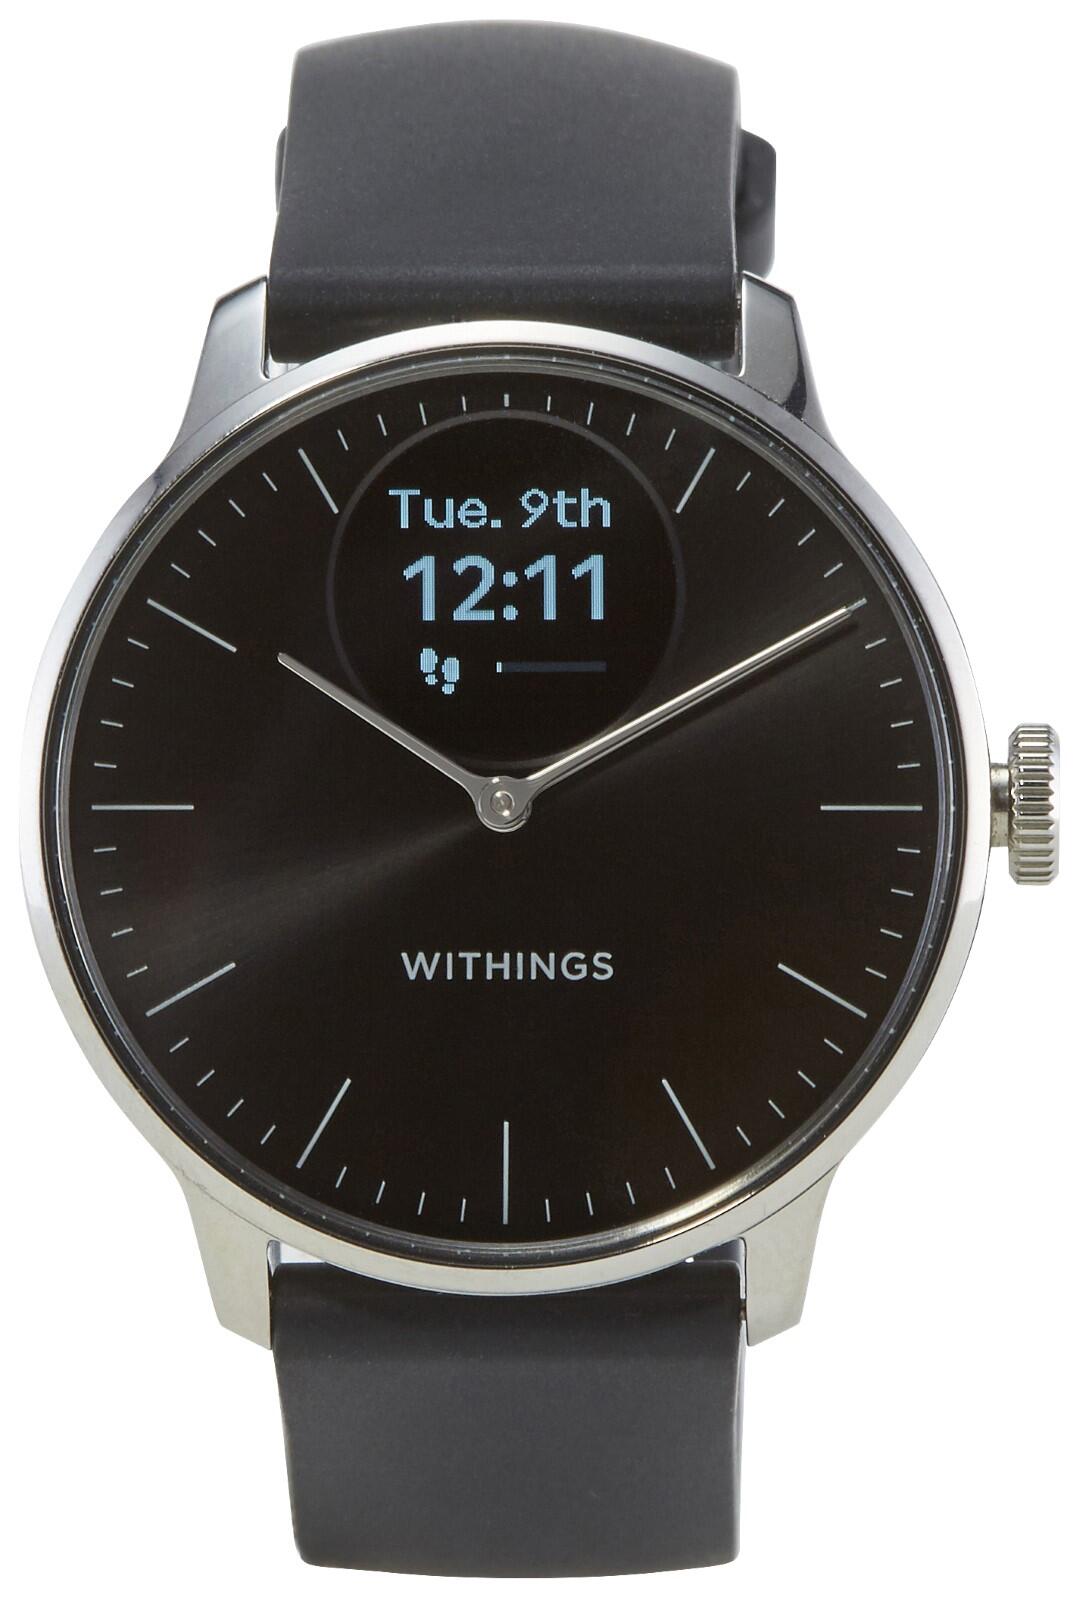 Scanwatch Light Withings